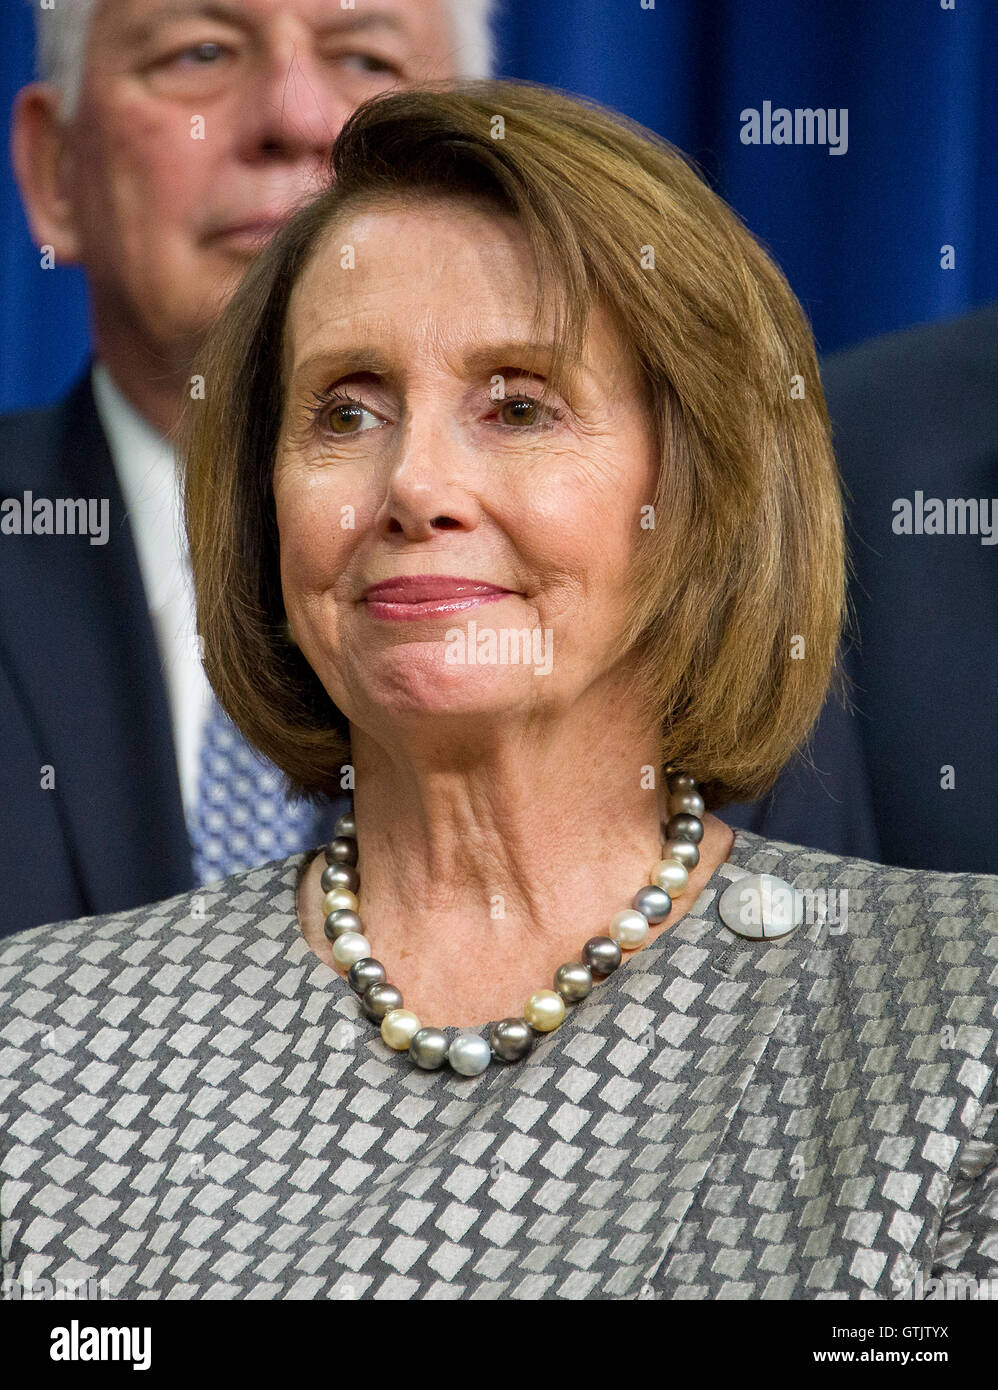 United States House Minority Leader Nancy Pelosi (Democrat of California) looks on as US President Barack Obama makes remarks prior to signing H.R. 2576, the Frank R. Lautenberg Chemical Safety for the 21st Century Act in the South Court Auditorium of the Stock Photo